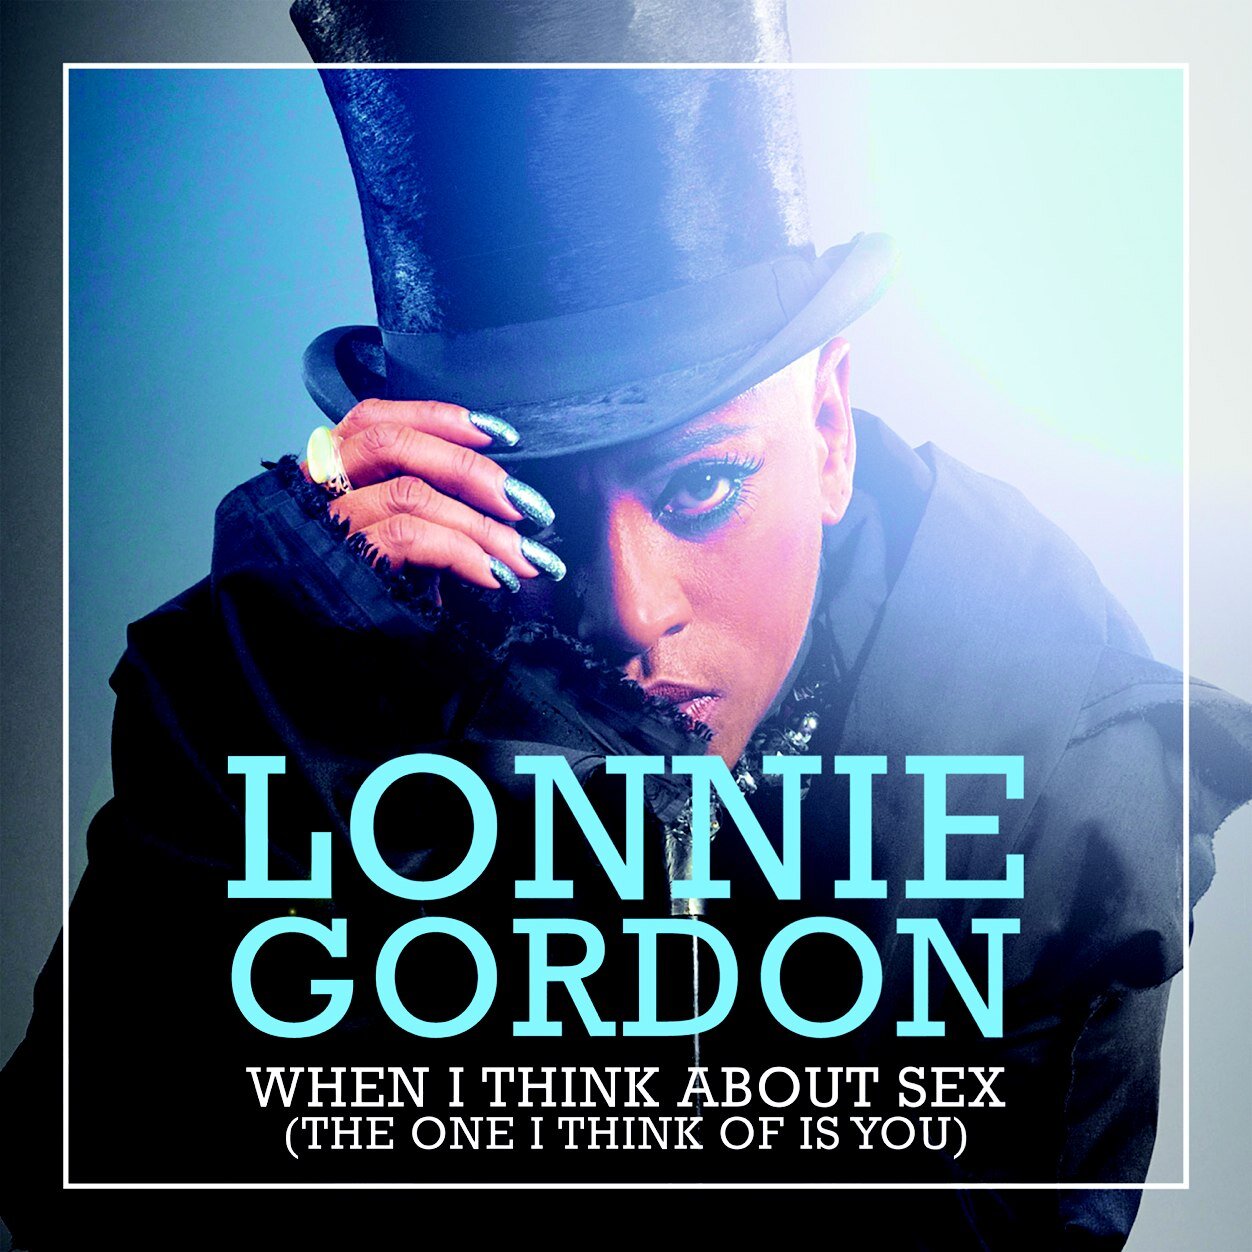 Lonnie Gordon: The embodiment of an Artist - Singer, Performer, Recording Artist, Actress, Painter and Vocal Coach.